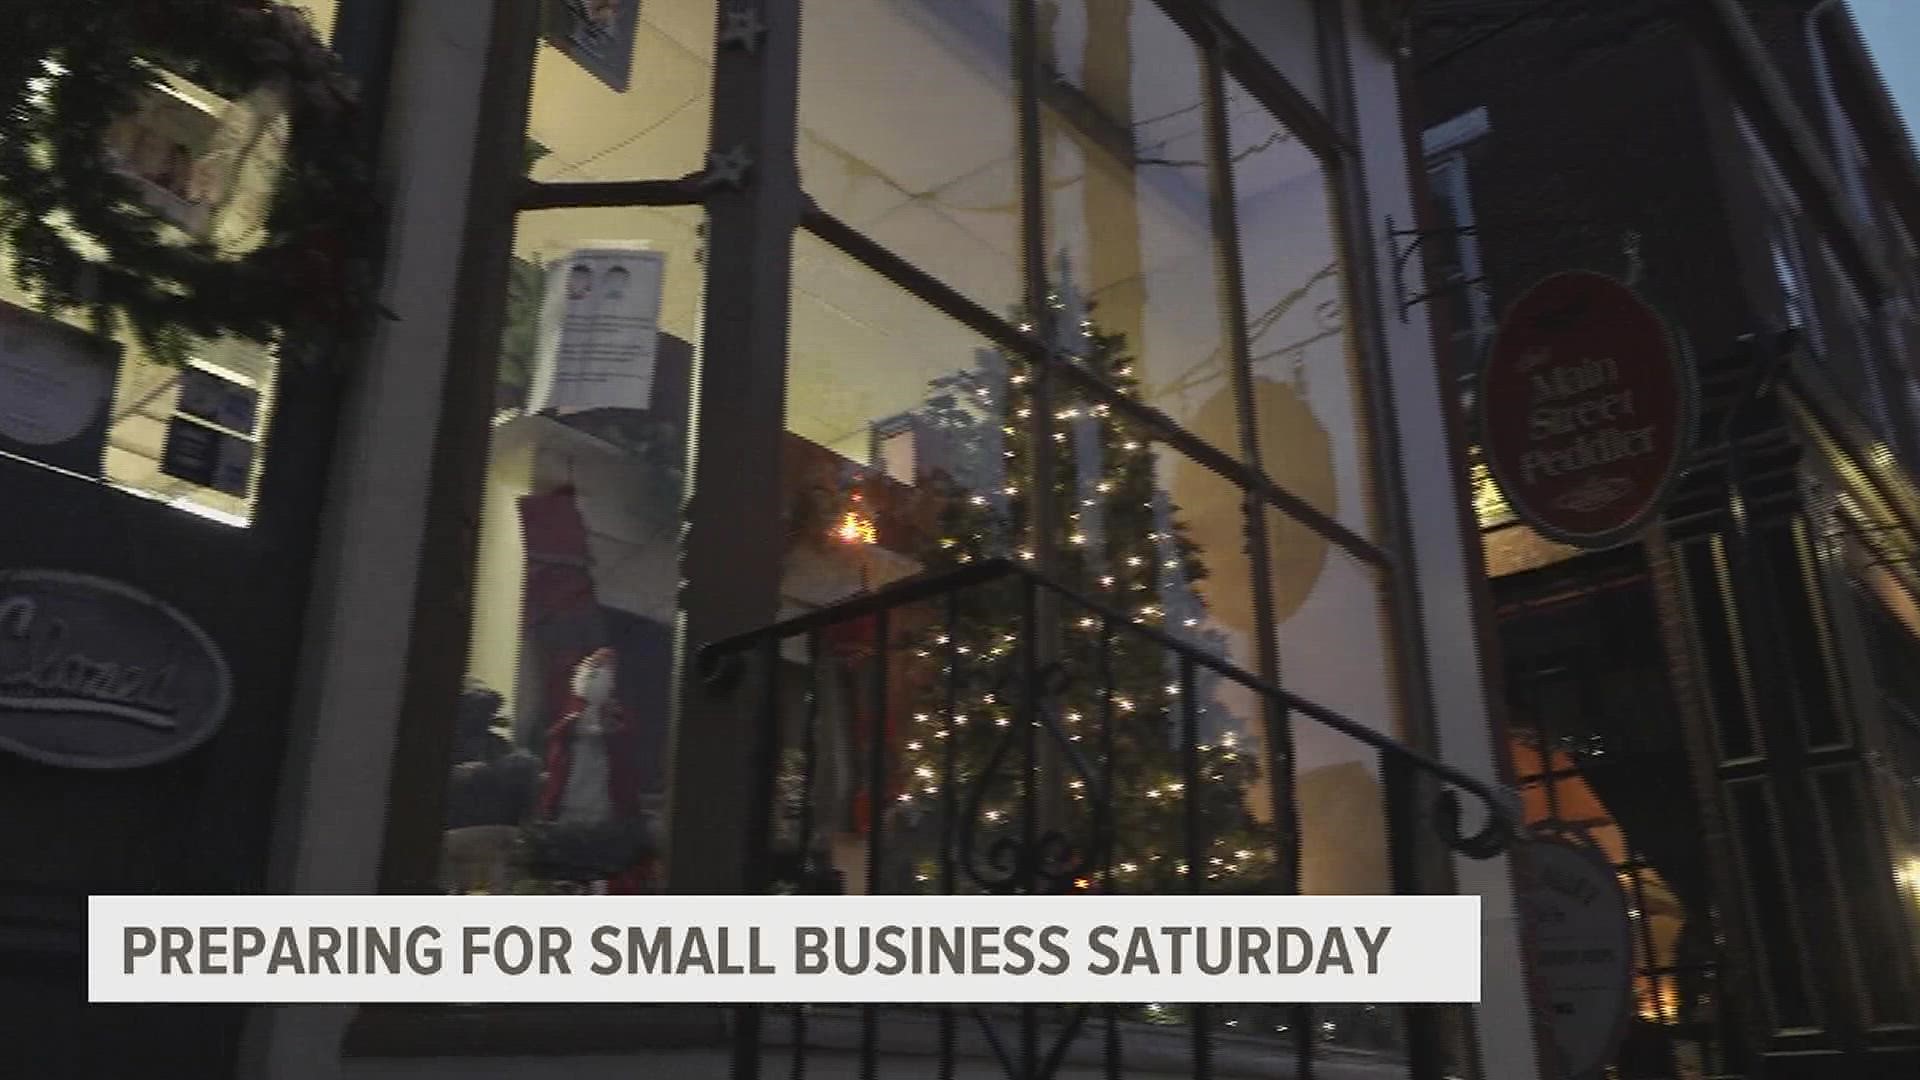 Small business Saturday follows Black Friday. Owners hope it will draw even more customers to their doors.